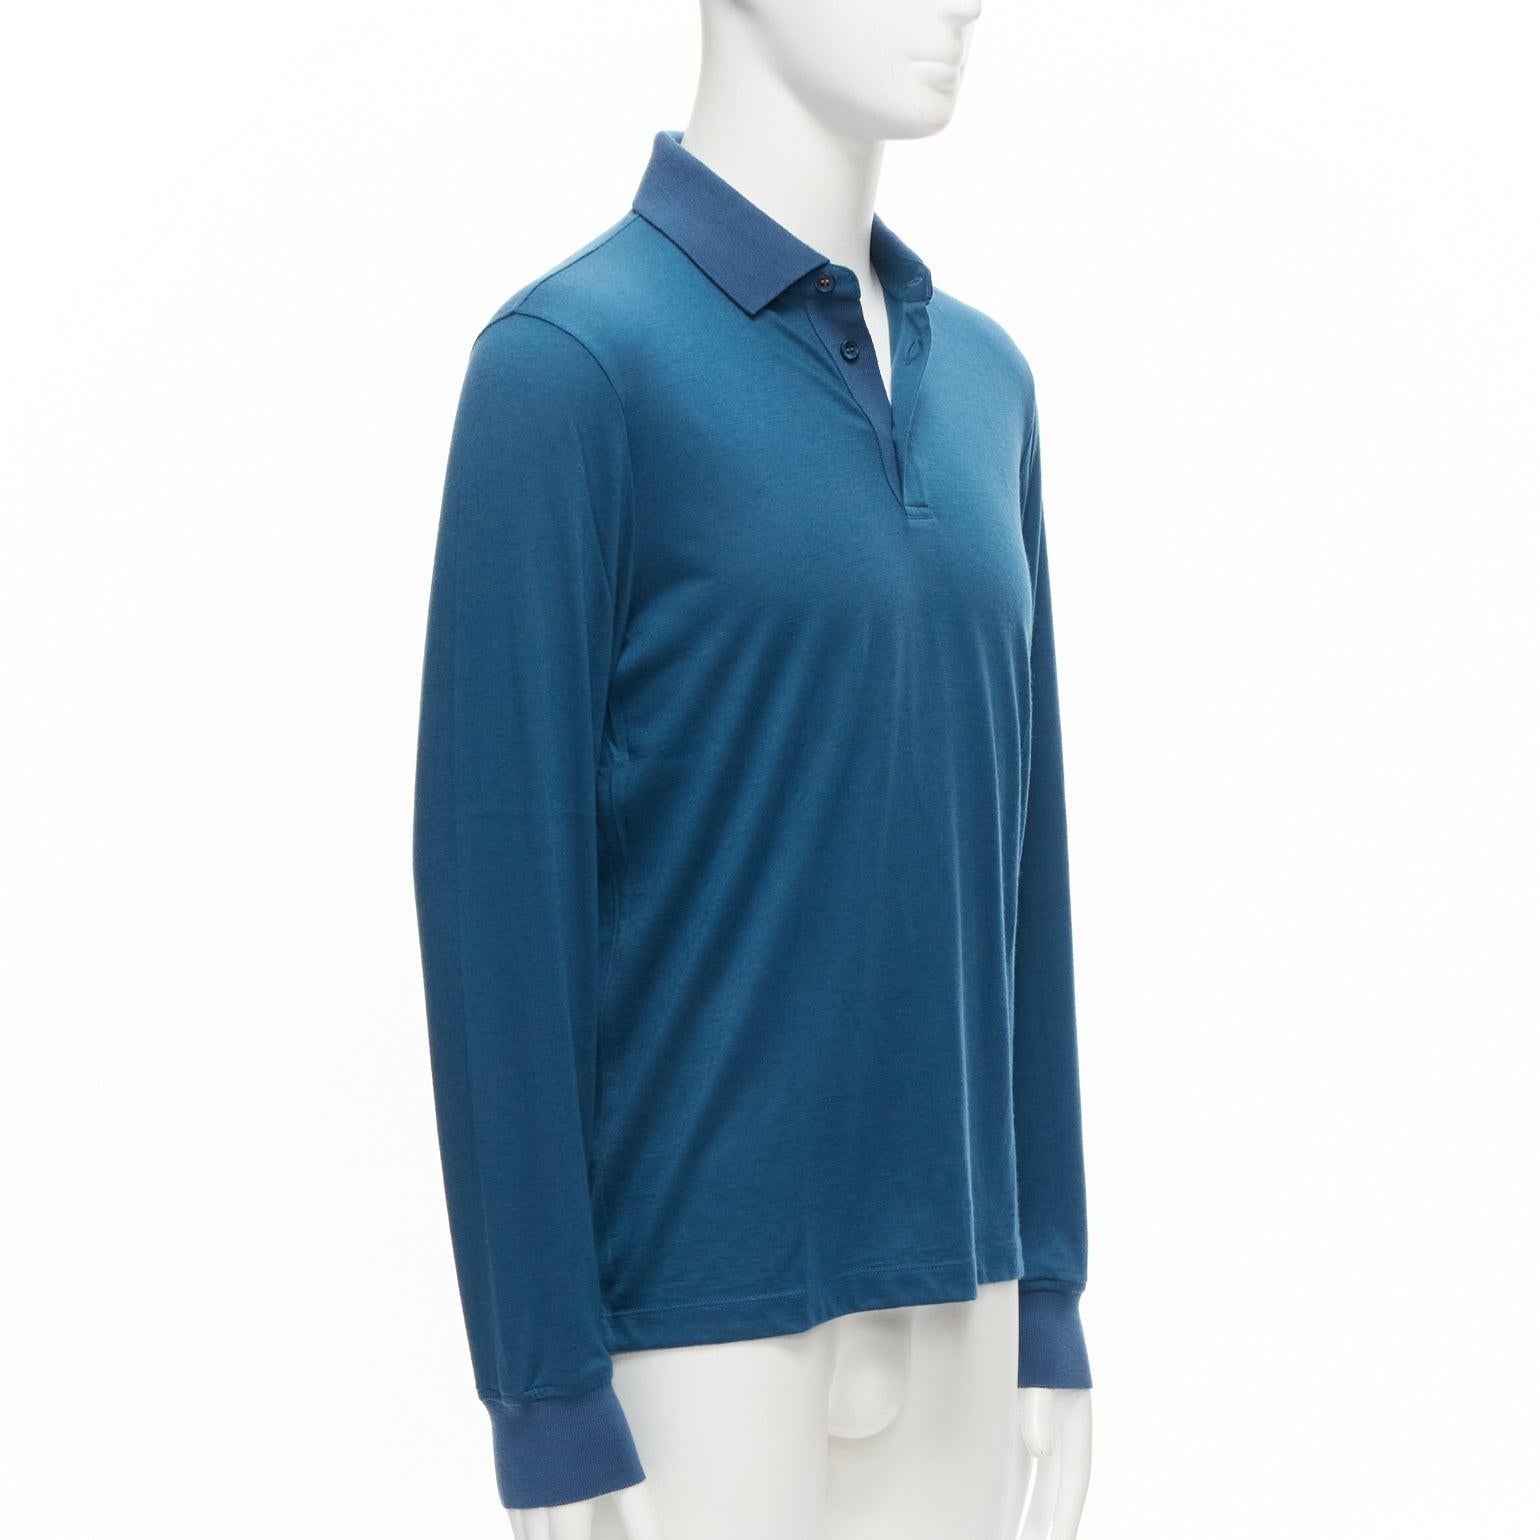 Blue LORO PIANA teal blue 100% cashmere stitch button detail long sleeve polo shirt M For Sale